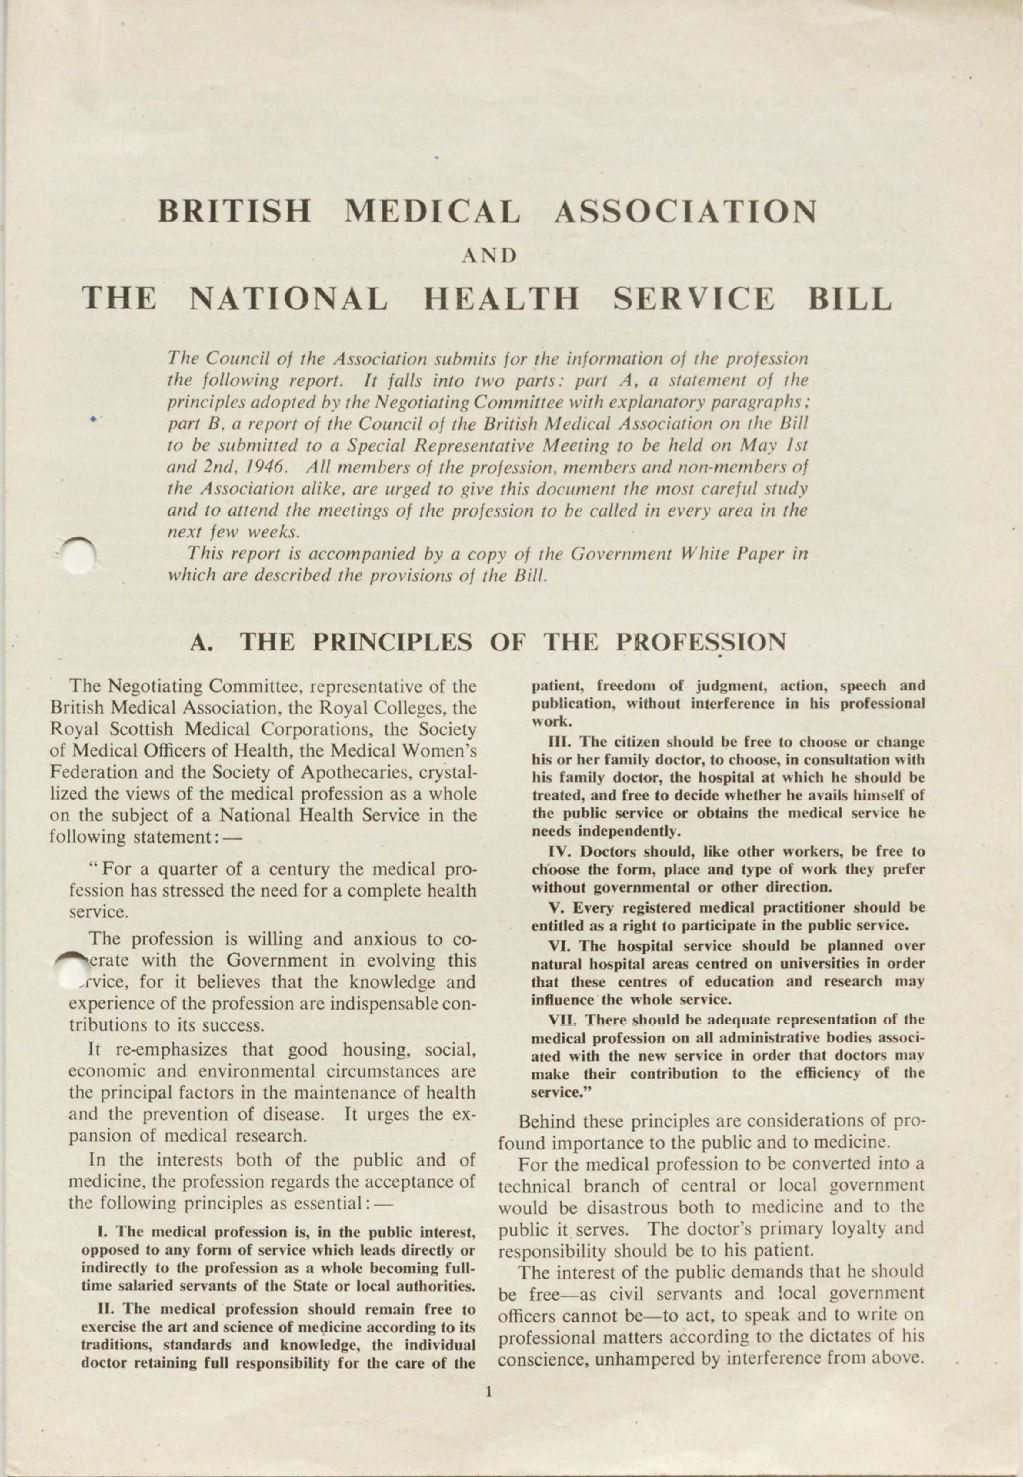 British Medical Association and the National Health Service Bill, 1946